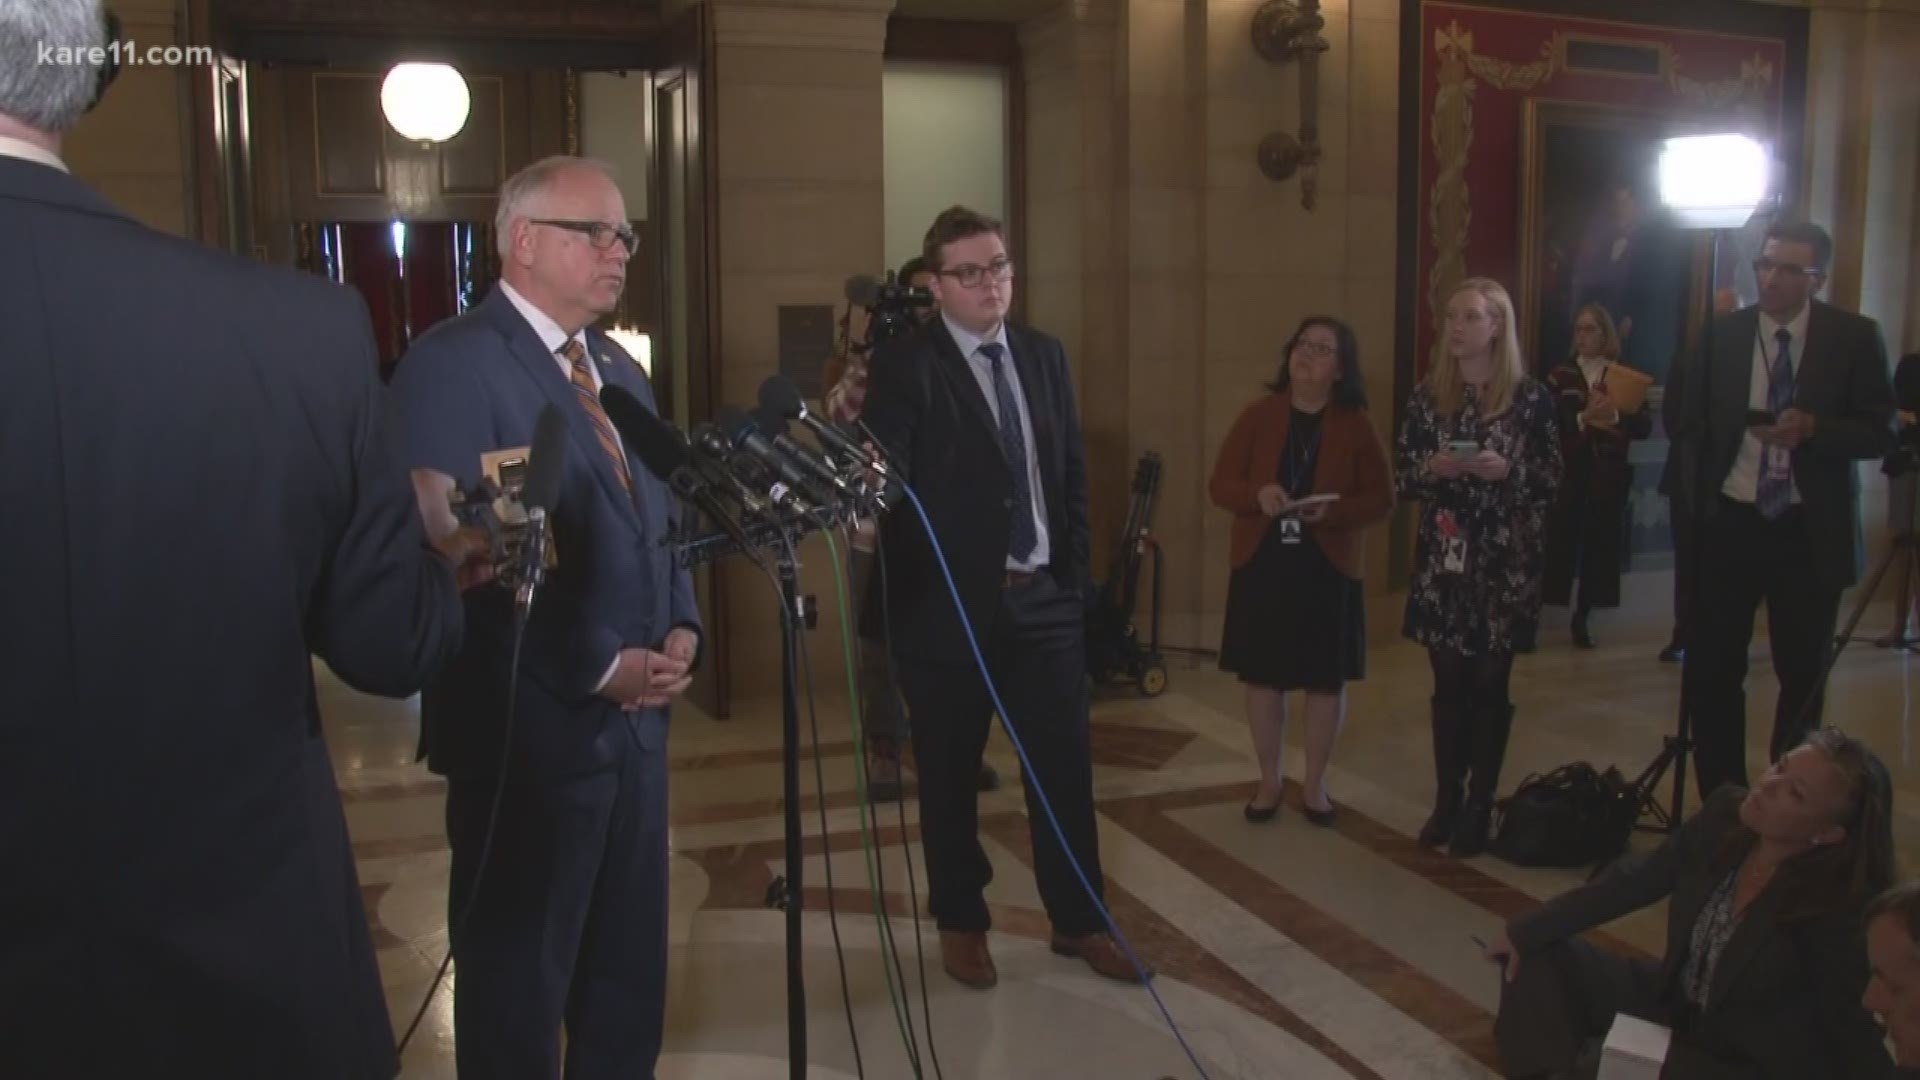 Gov. Walz and legislative leaders broke off budget talks Tuesday afternoon, and won't return to the bargaining table until Sunday evening. Gov. Walz and DFL House leaders said they're waiting for a genuine counter offer from Senate Republicans. GOP leaders say they're waiting for the Democrats to back away from their tax hikes.